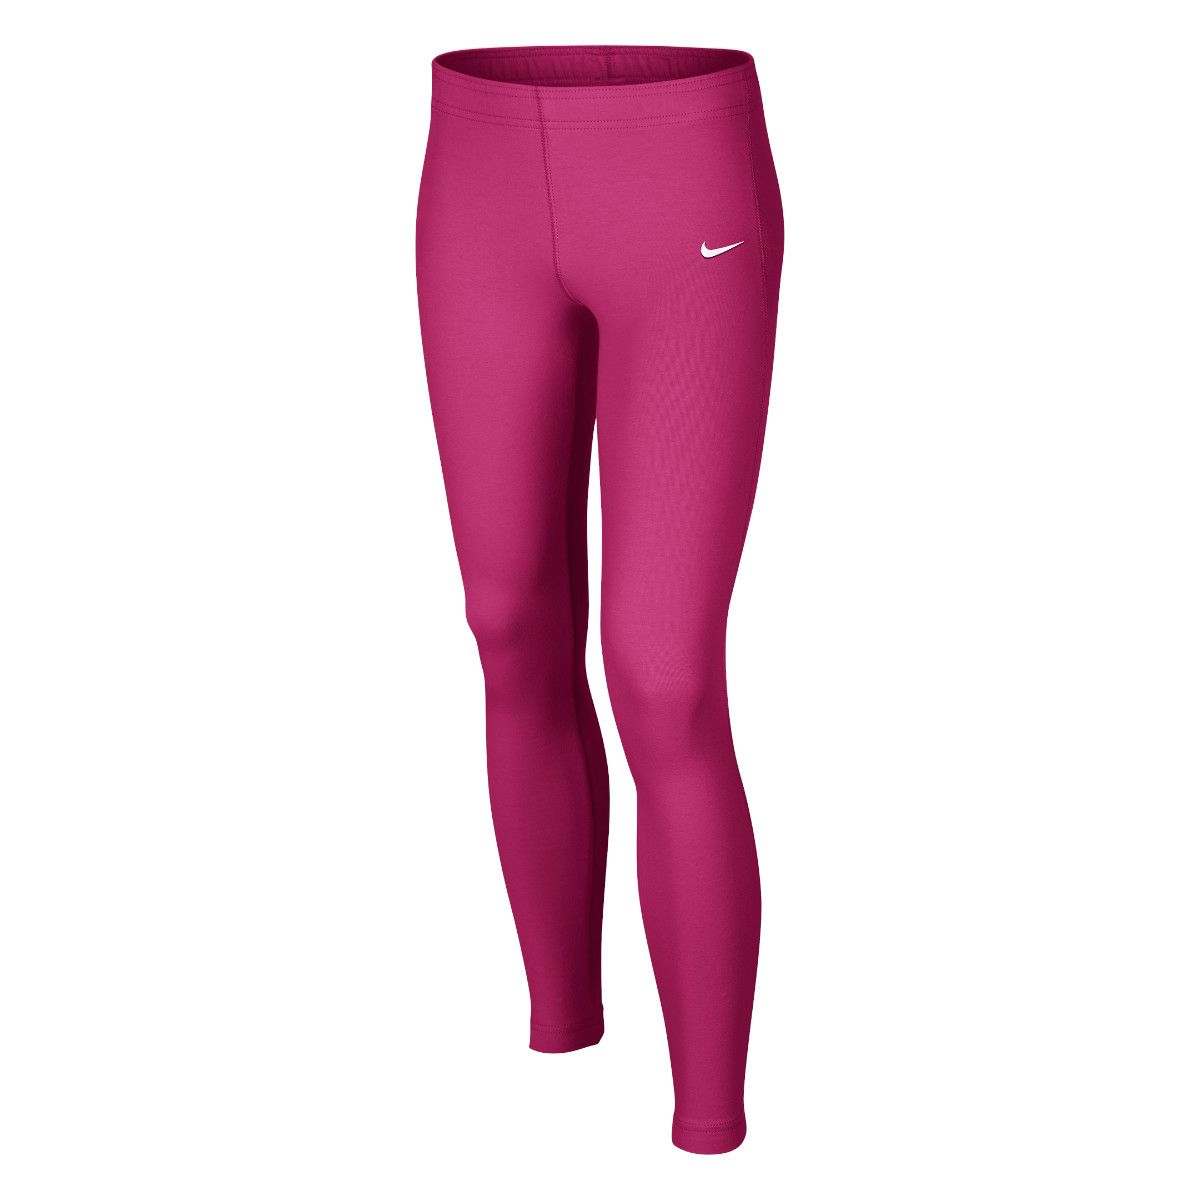 Nike Leg-A-See Just Do It Girls' Tights 679209-616